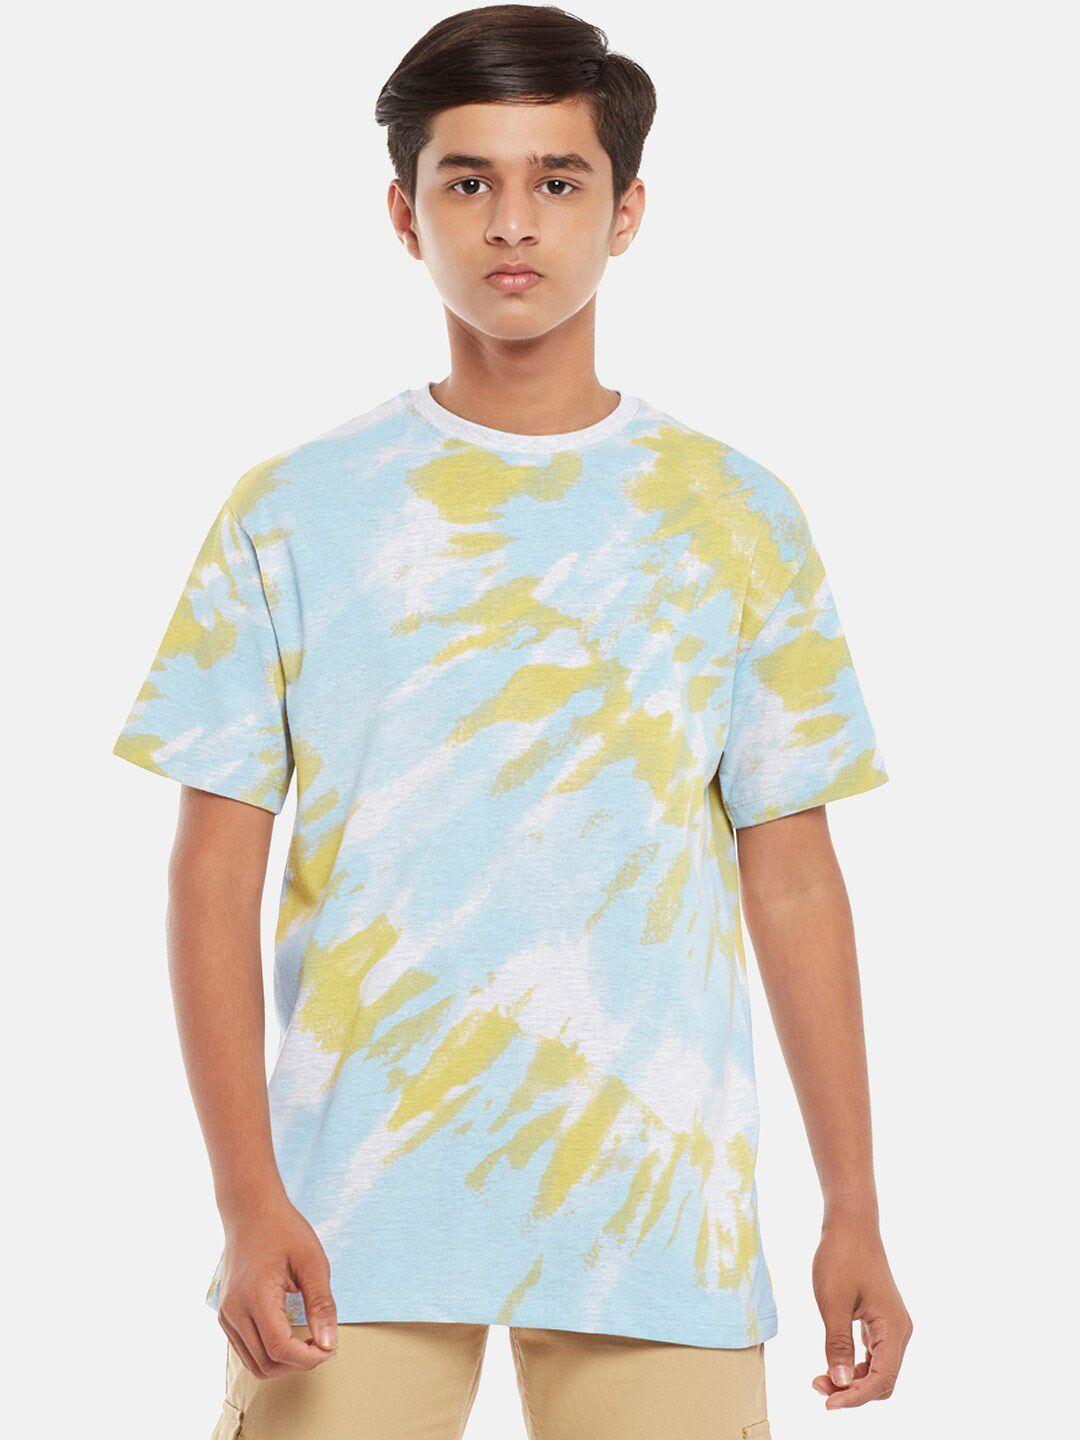 coolsters by pantaloons boys grey melange & blue tie and dye dyed t-shirt